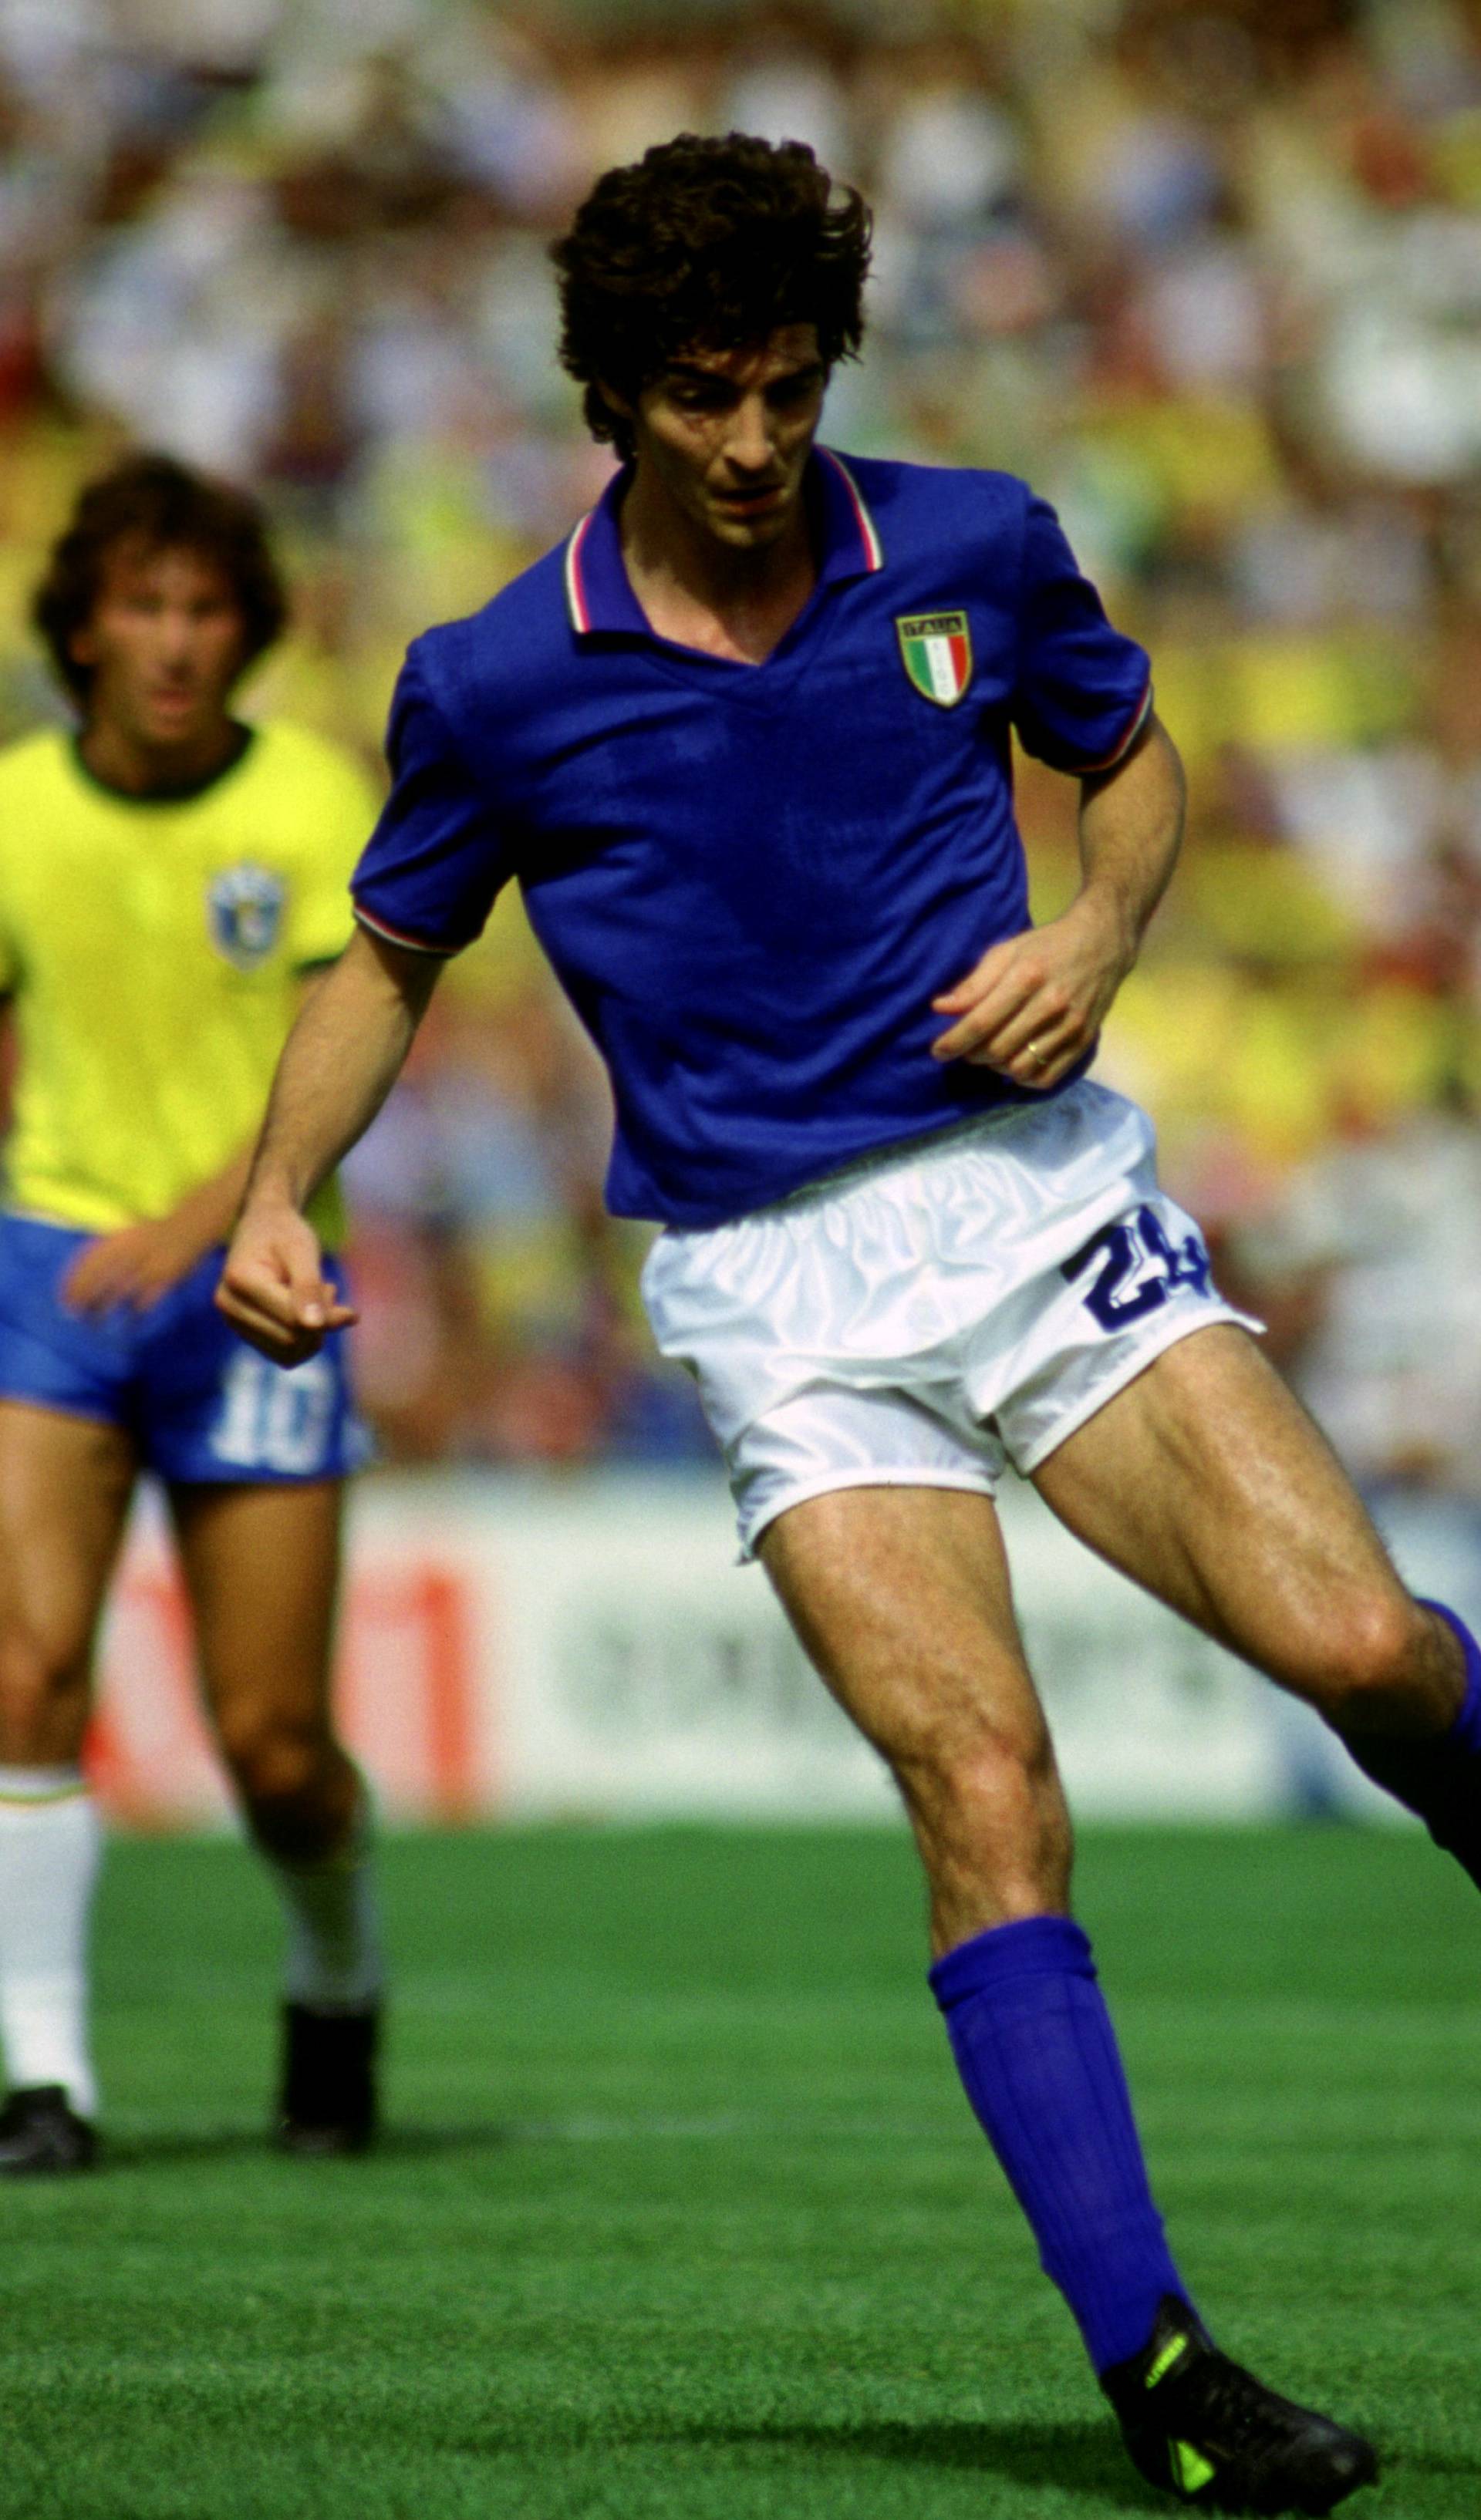 FILE PHOTO: An image of footballer Paolo Rossi of Italy, July 5, 1982